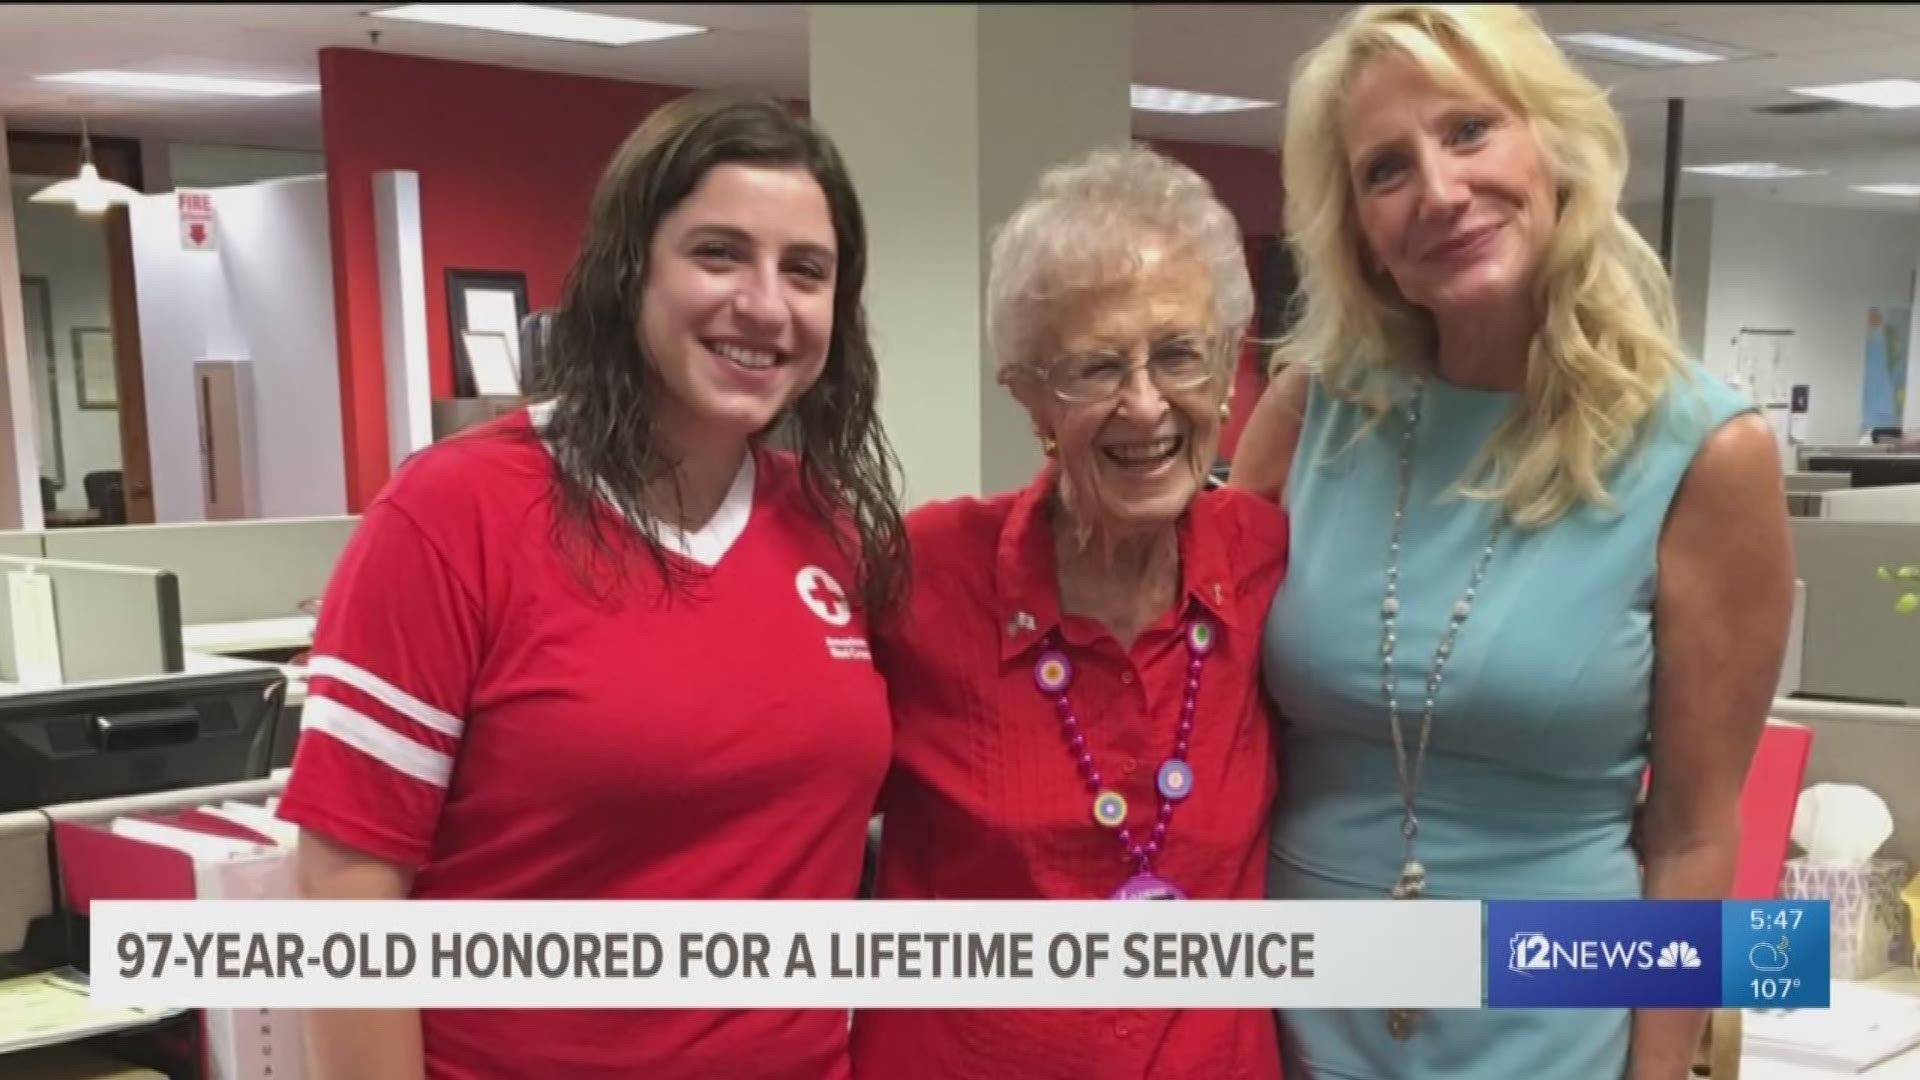 At 97 years old, this Scottsdale woman is being honored for her 79 years of service at the American Red Cross.